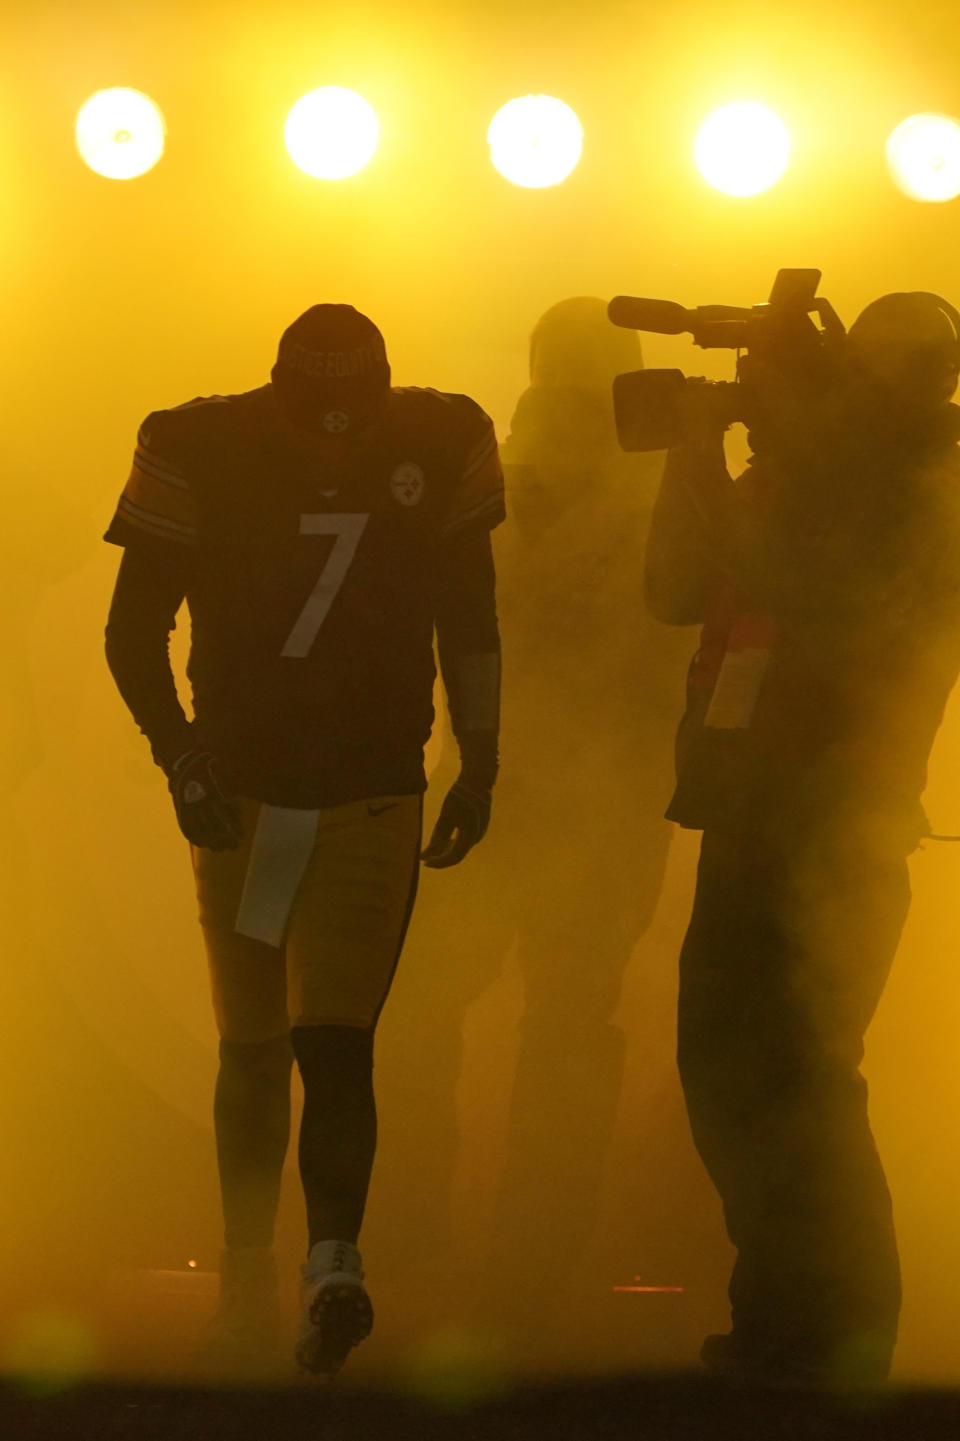 Pittsburgh Steelers quarterback Ben Roethlisberger (7) takes the field before an NFL football game against the Cleveland Browns, Monday, Jan. 3, 2022, in Pittsburgh. (AP Photo/Gene J. Puskar)